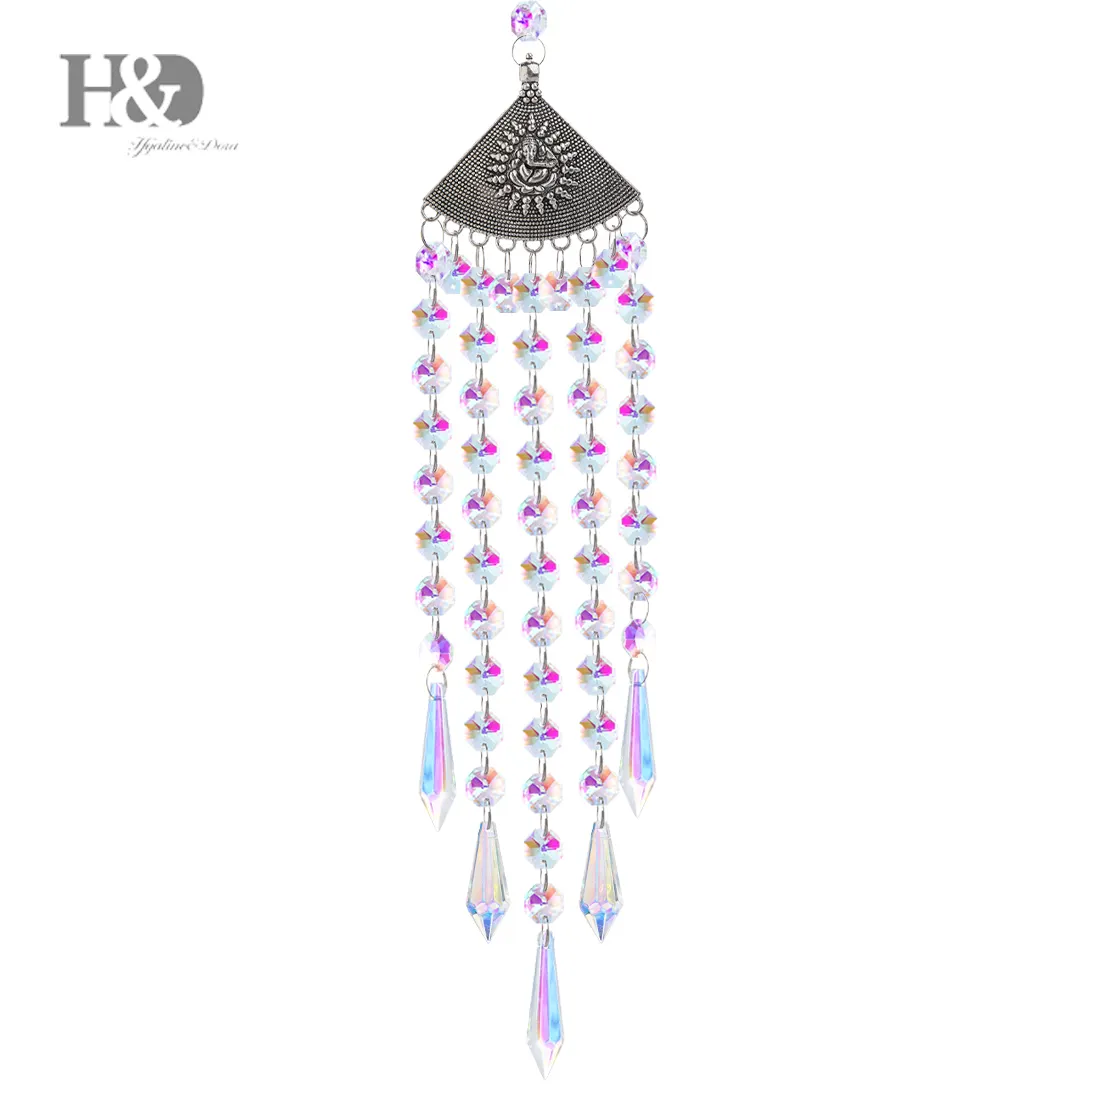 H&D Chandelier Crystal Prisms Hanging Suncatcher AB-Colored Wind Chimes Rainbow Catcher Window Curtains Home Garden Decor Gifts